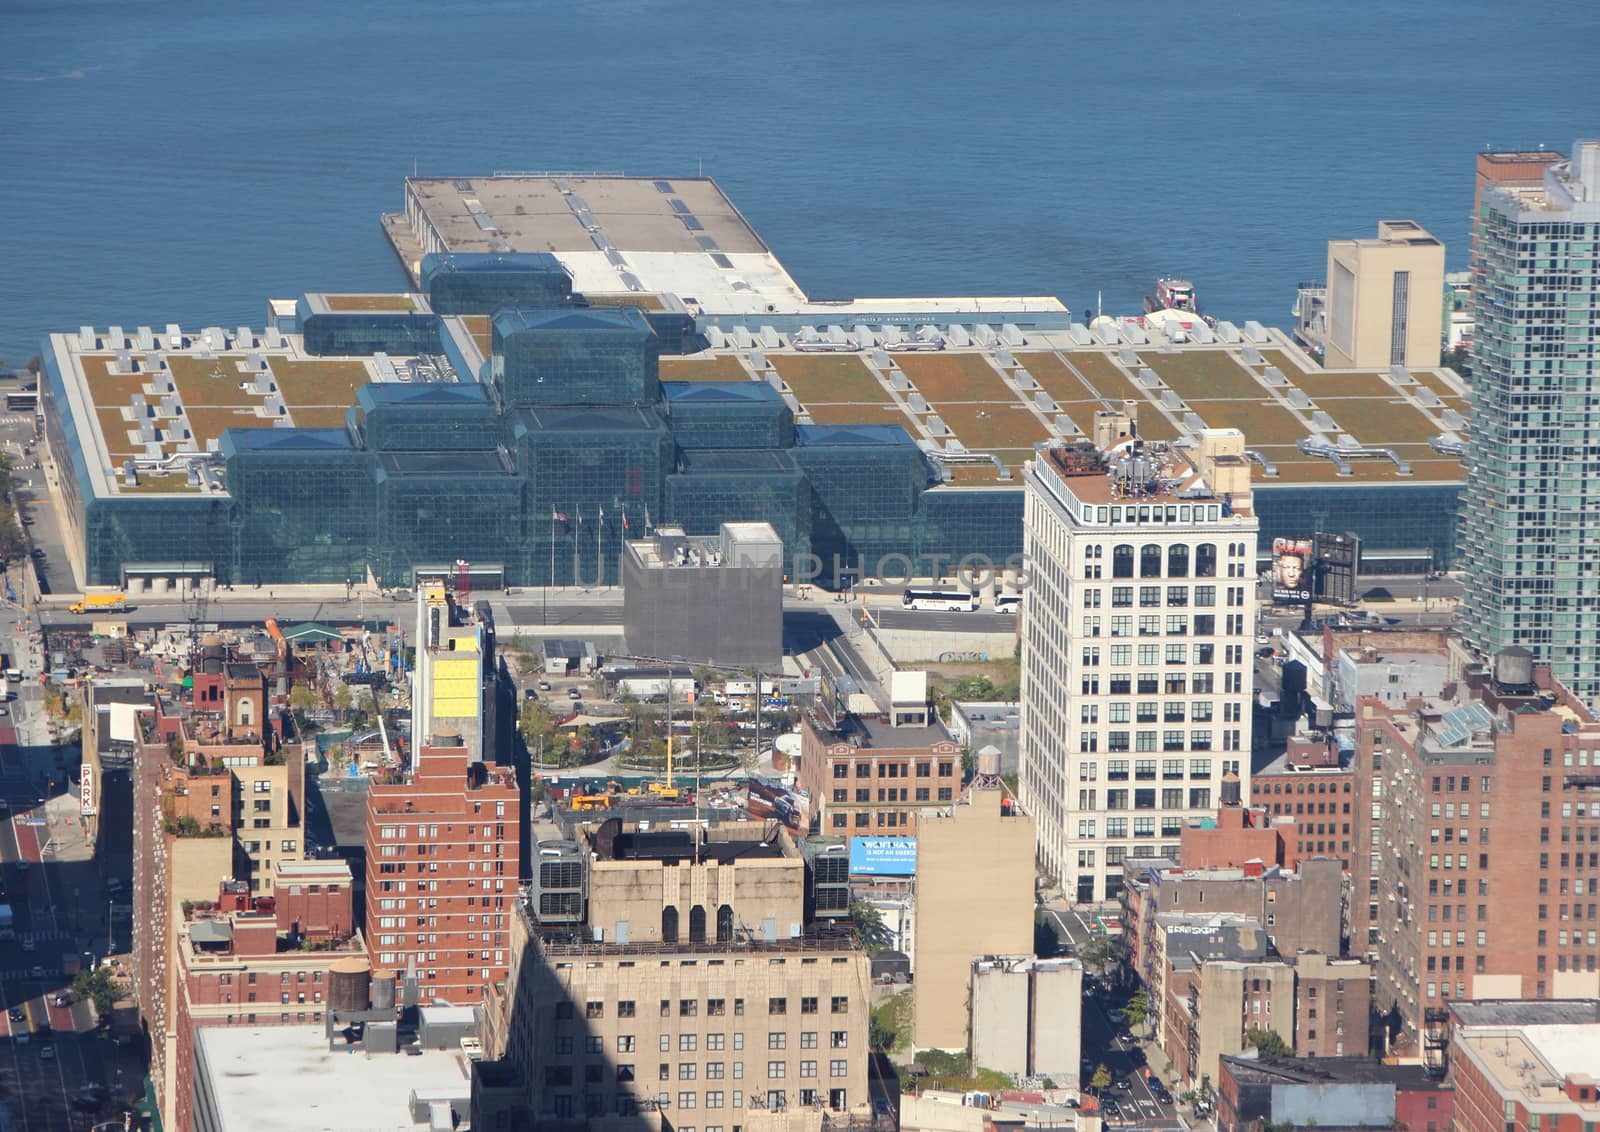 Javits Conference Center New York in Aerial Perspective by HoleInTheBox